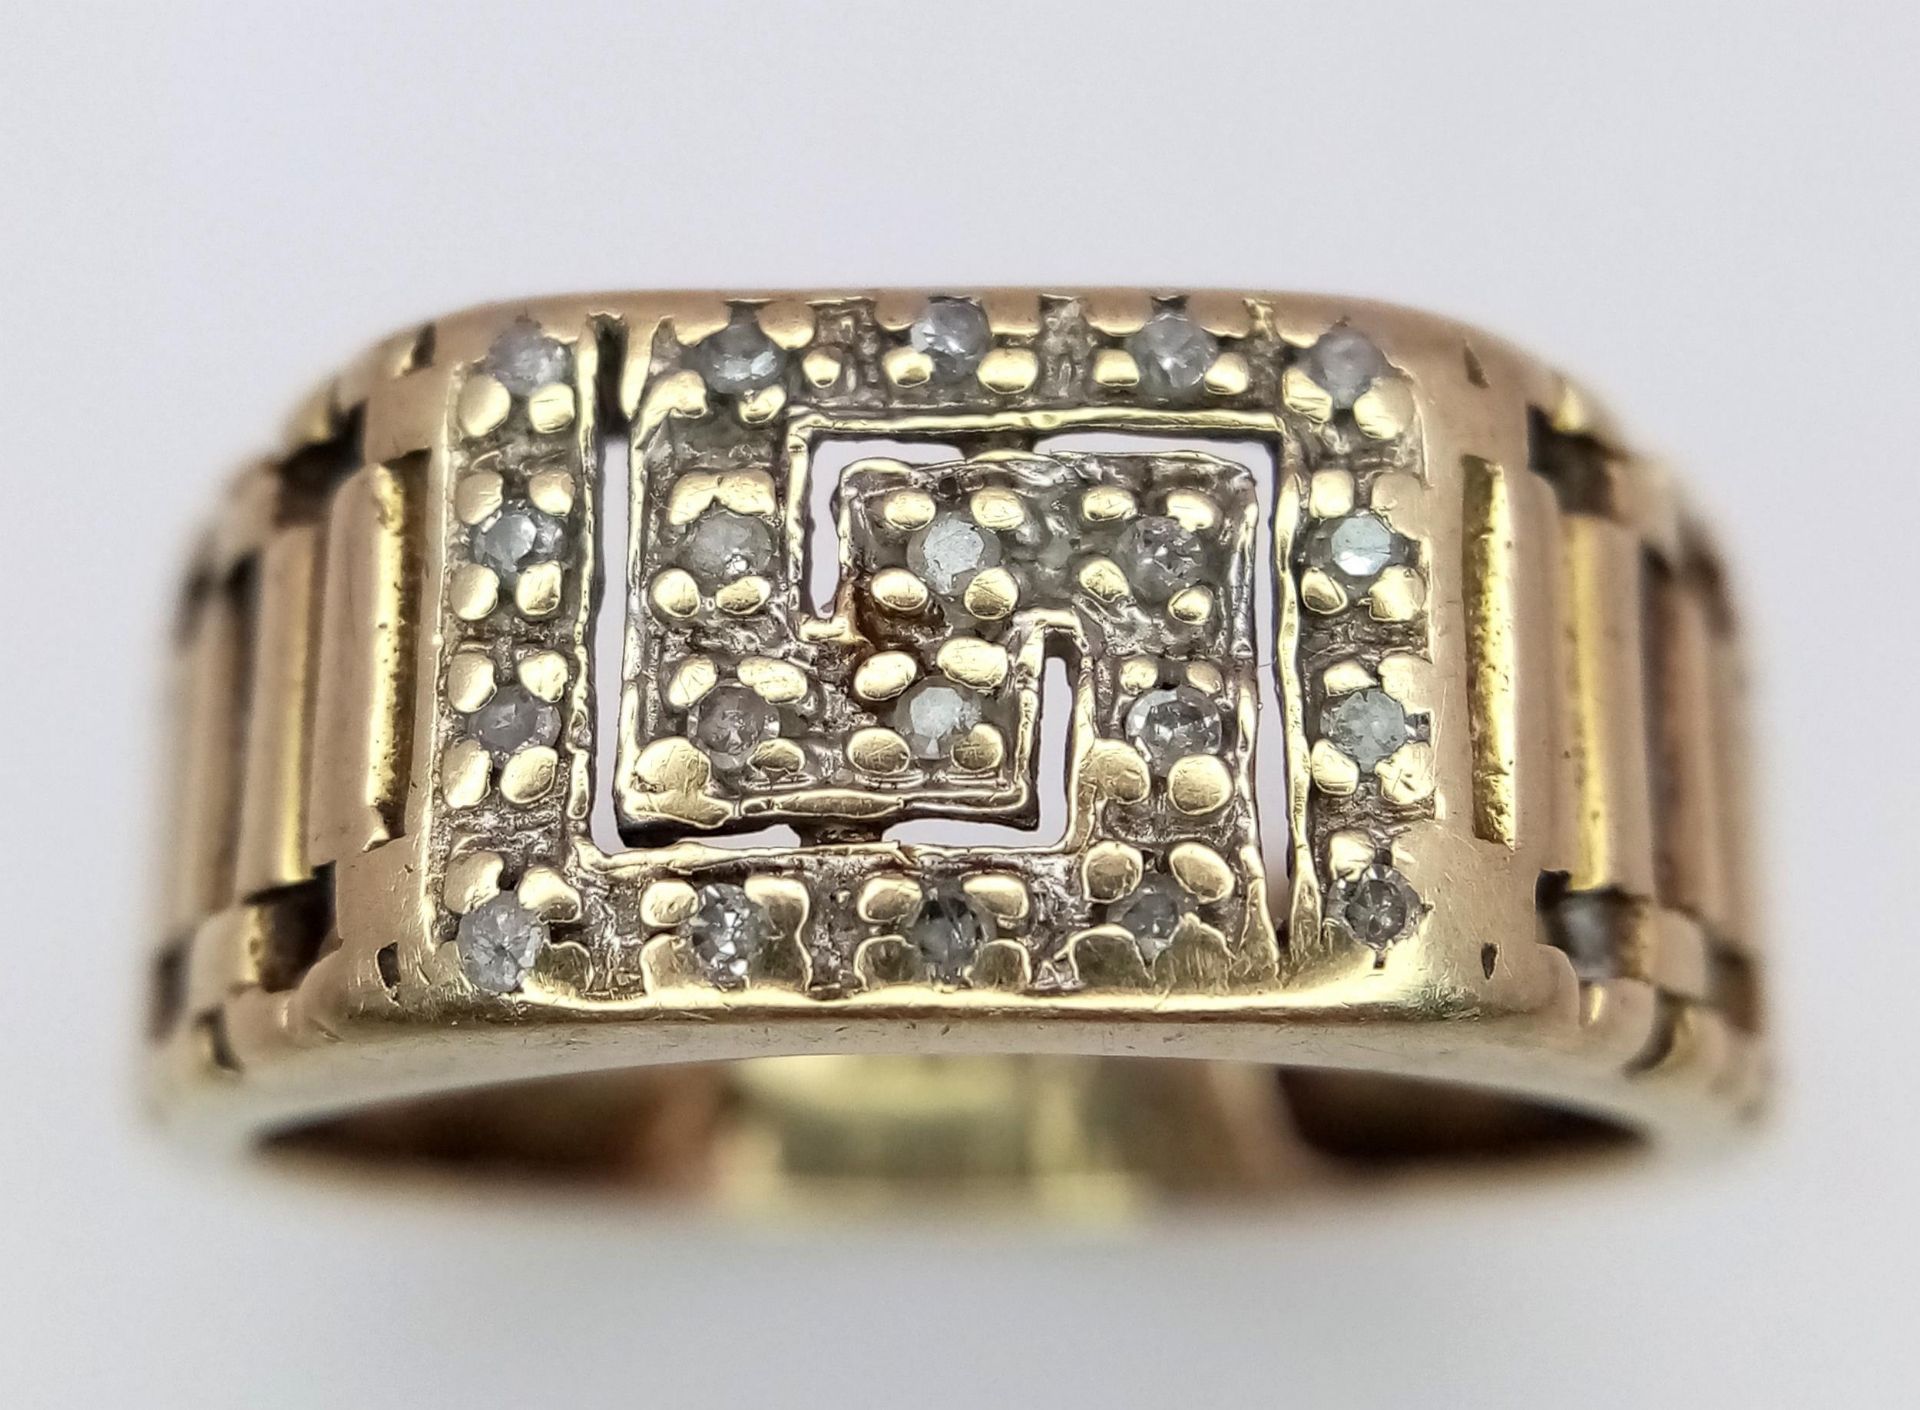 A Vintage 9K Yellow Gold and Diamond Decorative Belt Buckle Gents Ring. Size T. 4.4g total weight. - Image 2 of 5